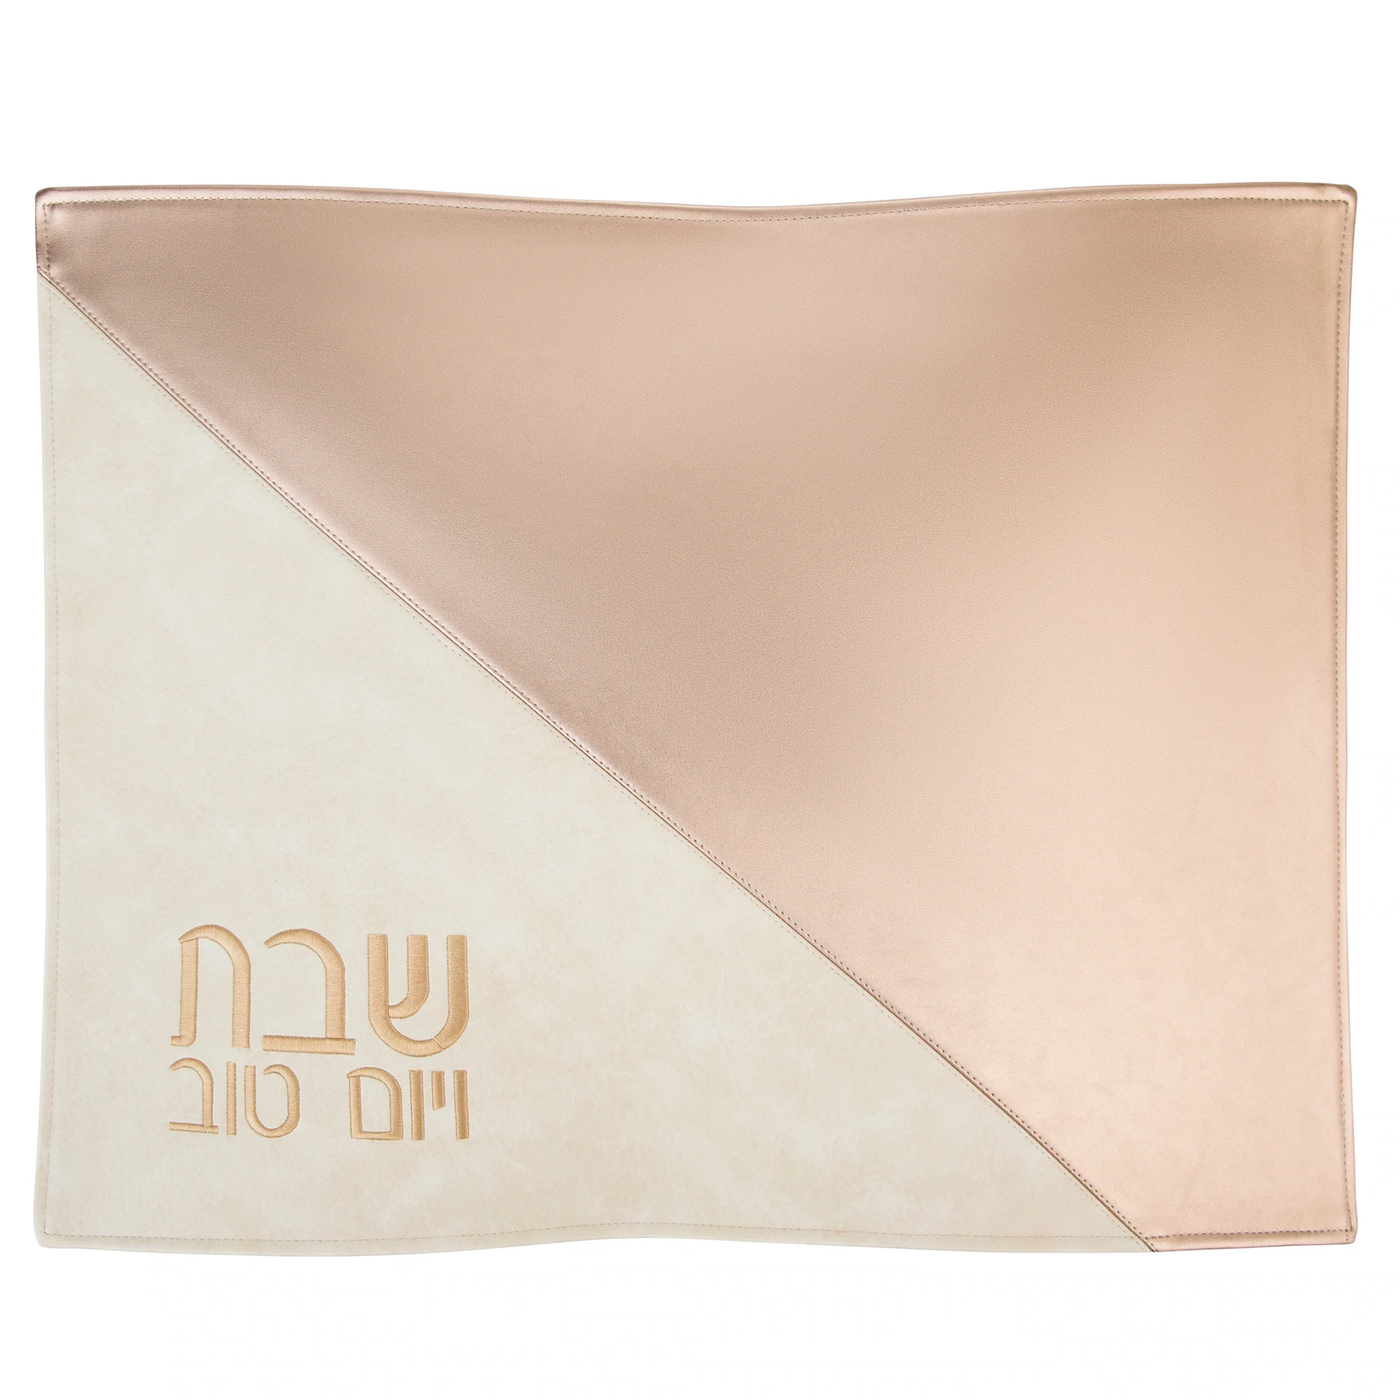 Diagonal Lined Challah Cover - Cream & Rose Gold - Set With Style